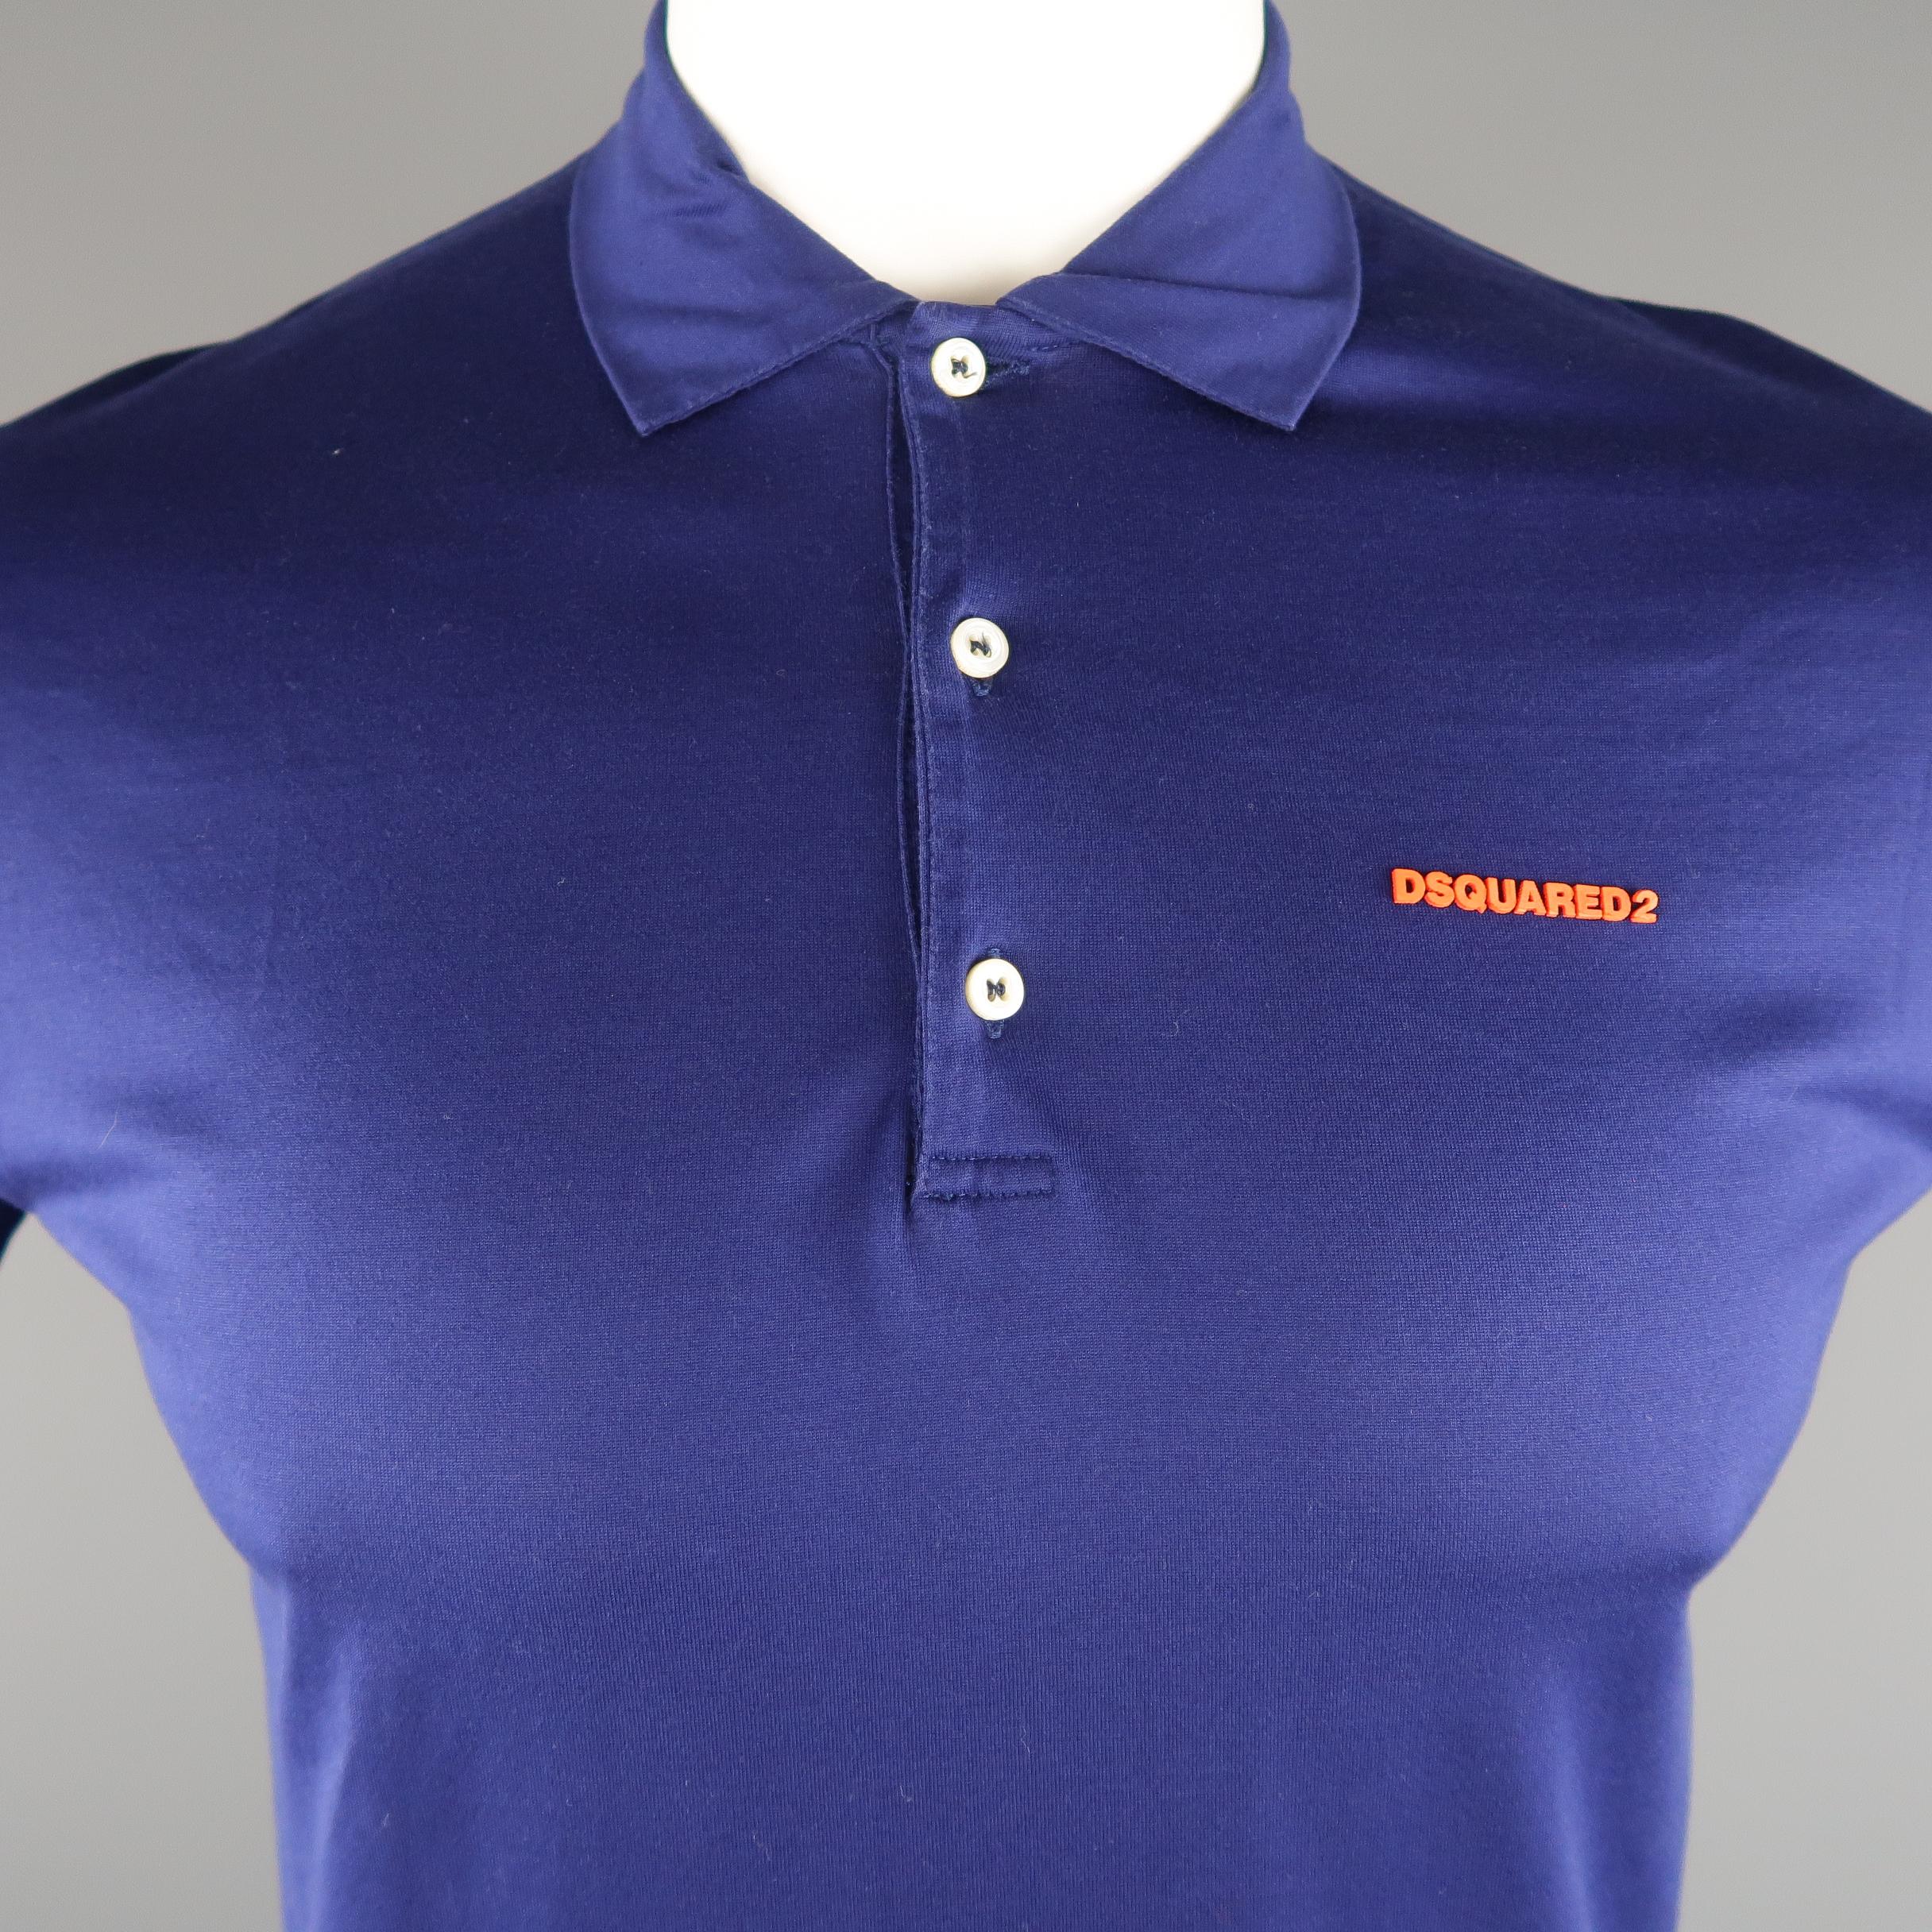 DSQUARED2 POLO shirt comes in a navy solid pique cotton, with contrast orange logo and buttoned. Made in Italy.
 
Excellent Pre-Owned Condition.
Marked: L
 
Measurements:
 
Shoulder: 17 in.
Chest: 41 in.
Sleeve: 8 in.
Length: 26 in.